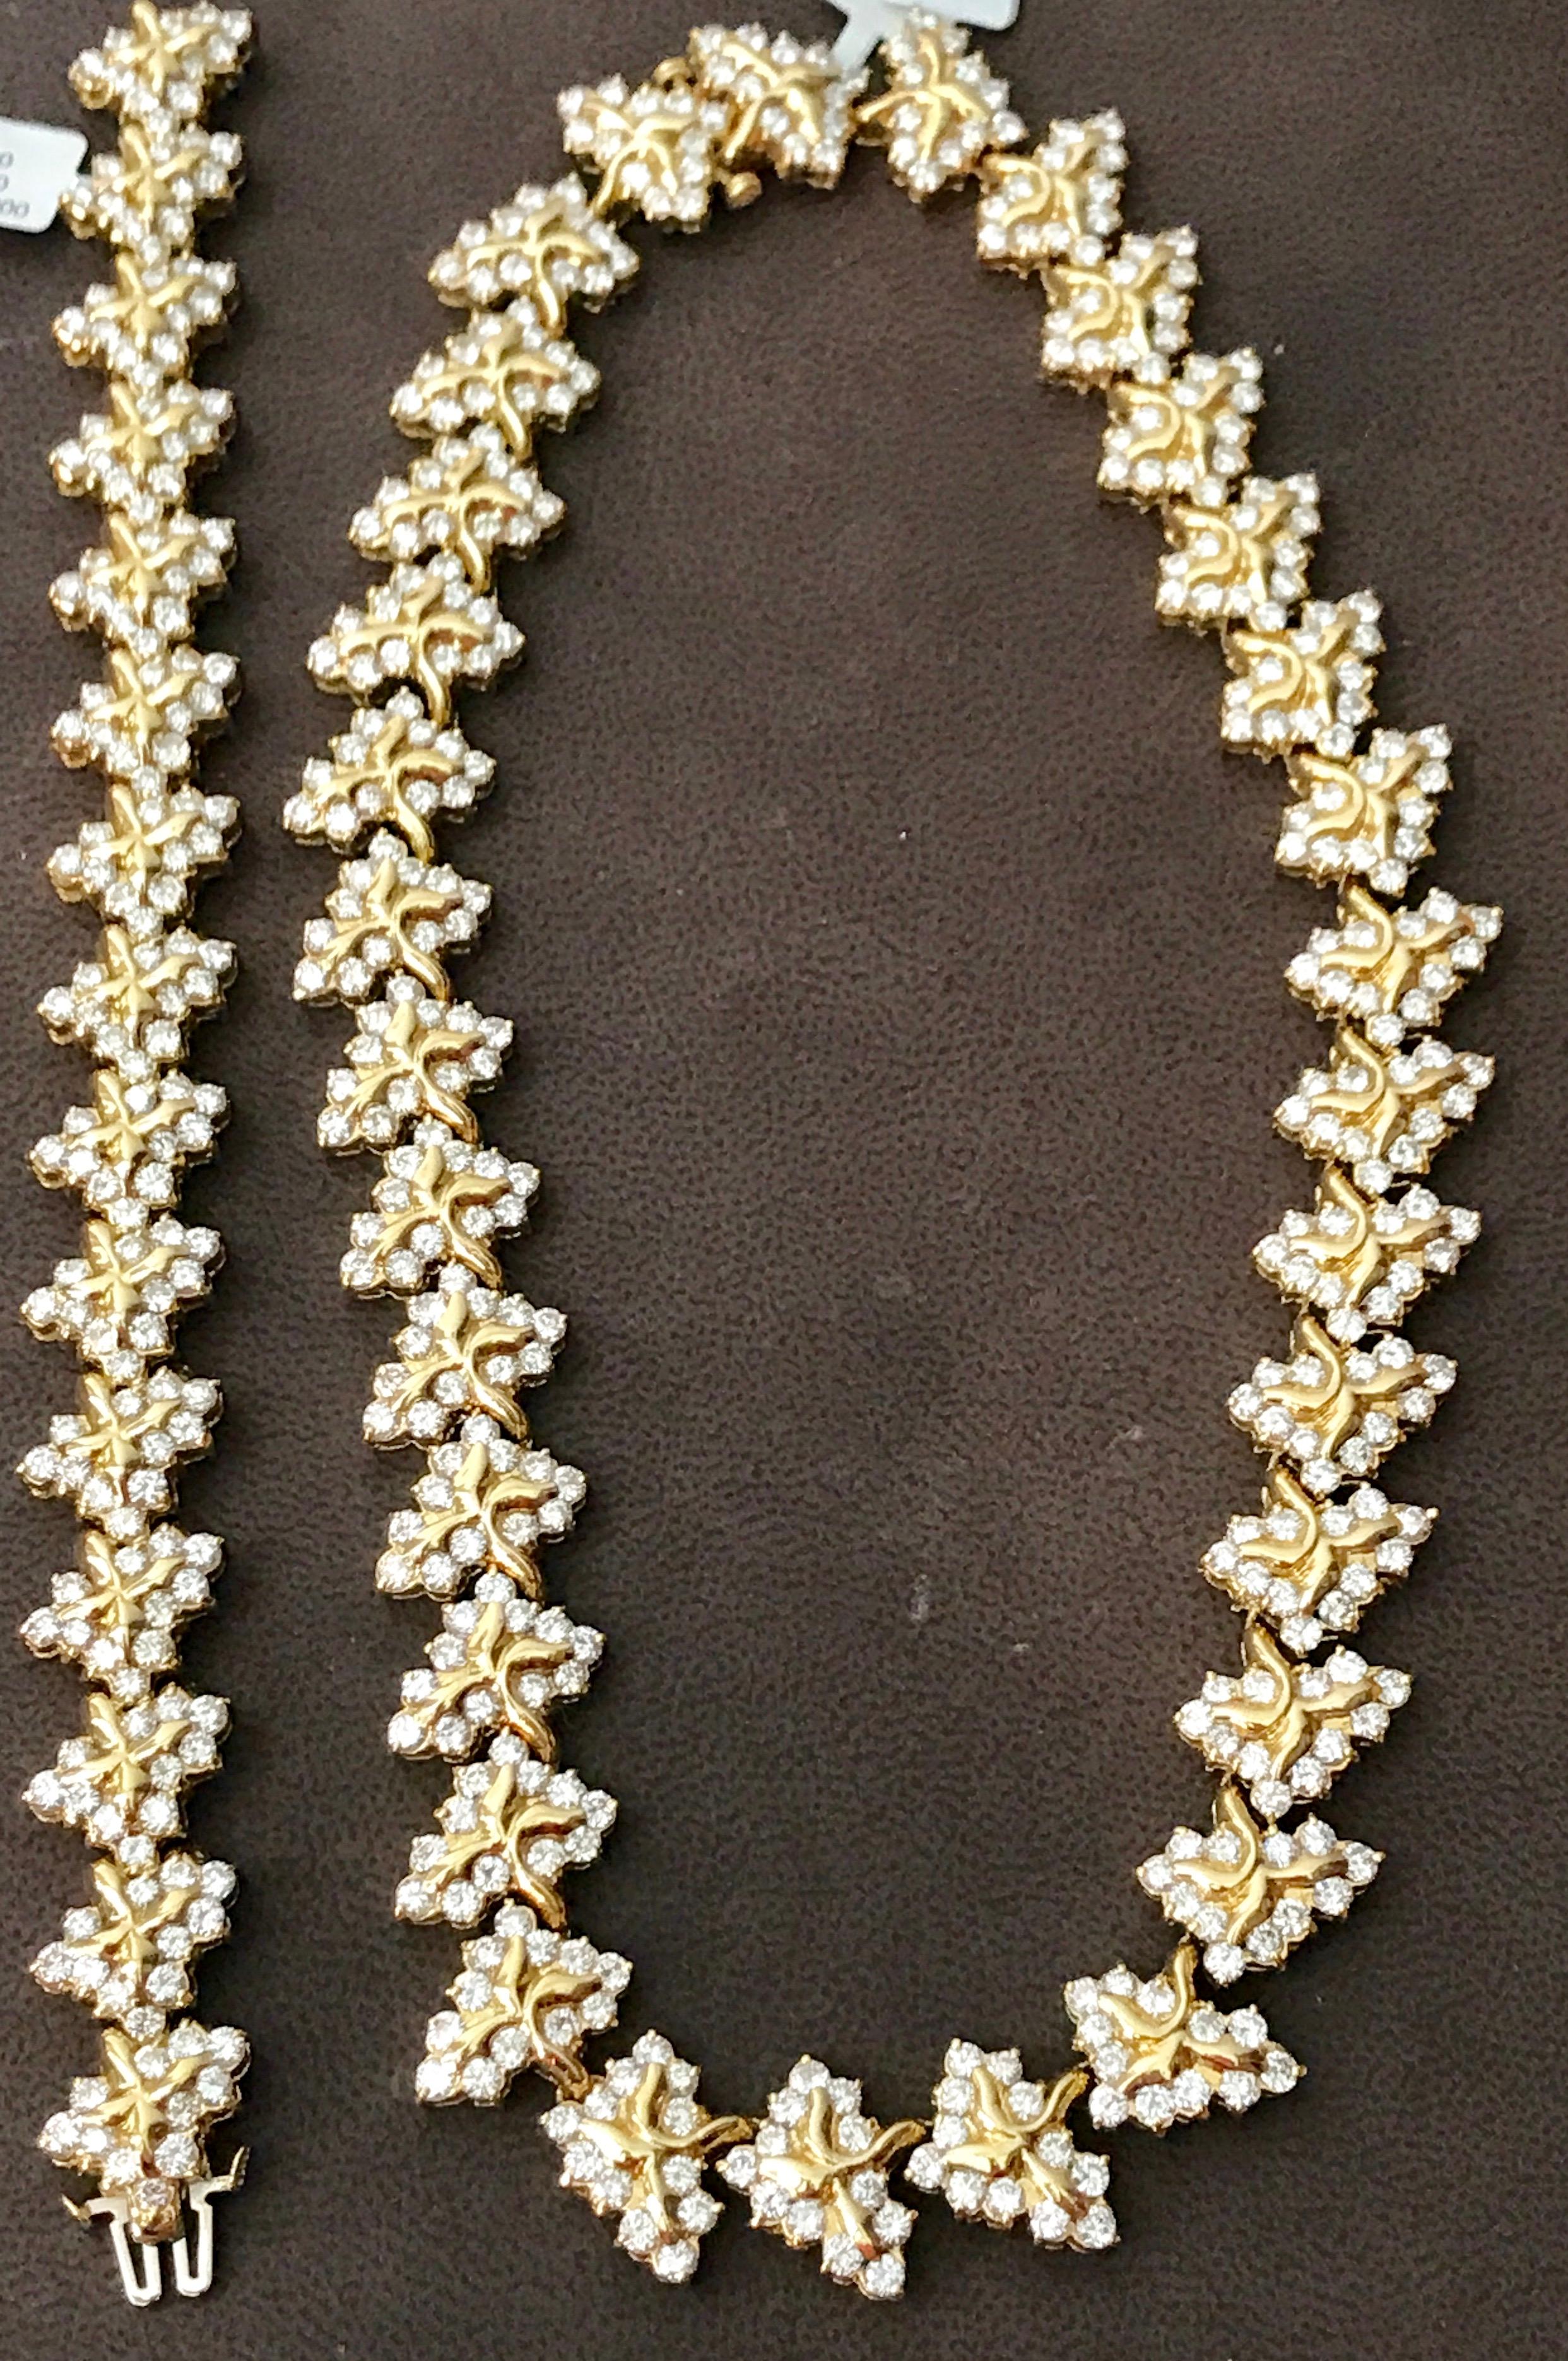 One of our premium Neckalce and Bracelet set  from our Bridal collection.
38 carats of VS quality of Diamonds all mounted in 14 karat yellow gold. Weight of the necklace and Bracelet is  is 180 grams. 
Necklace is 16 inch and bracelet is 7 inch